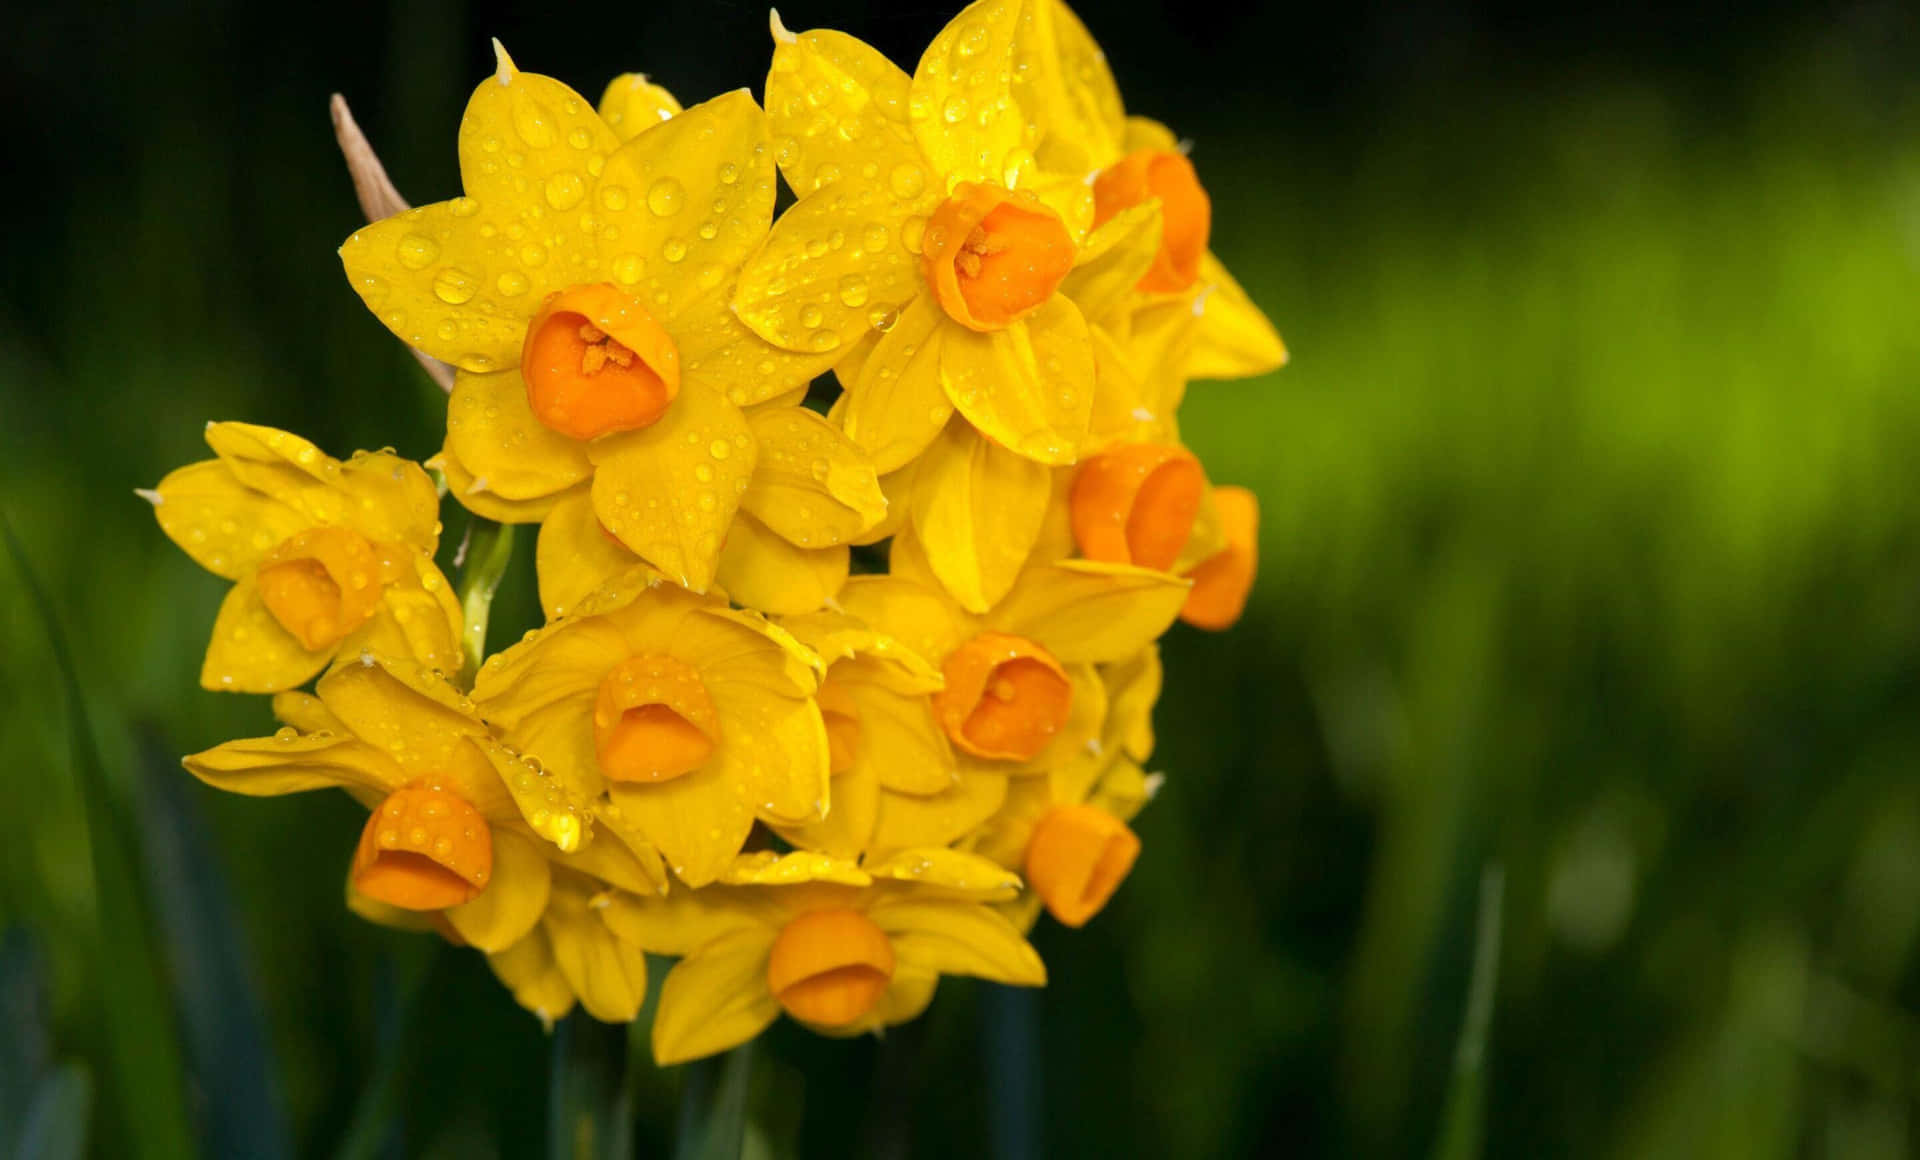 Vibrant Yellow Daffodils Blooming in Spring Wallpaper